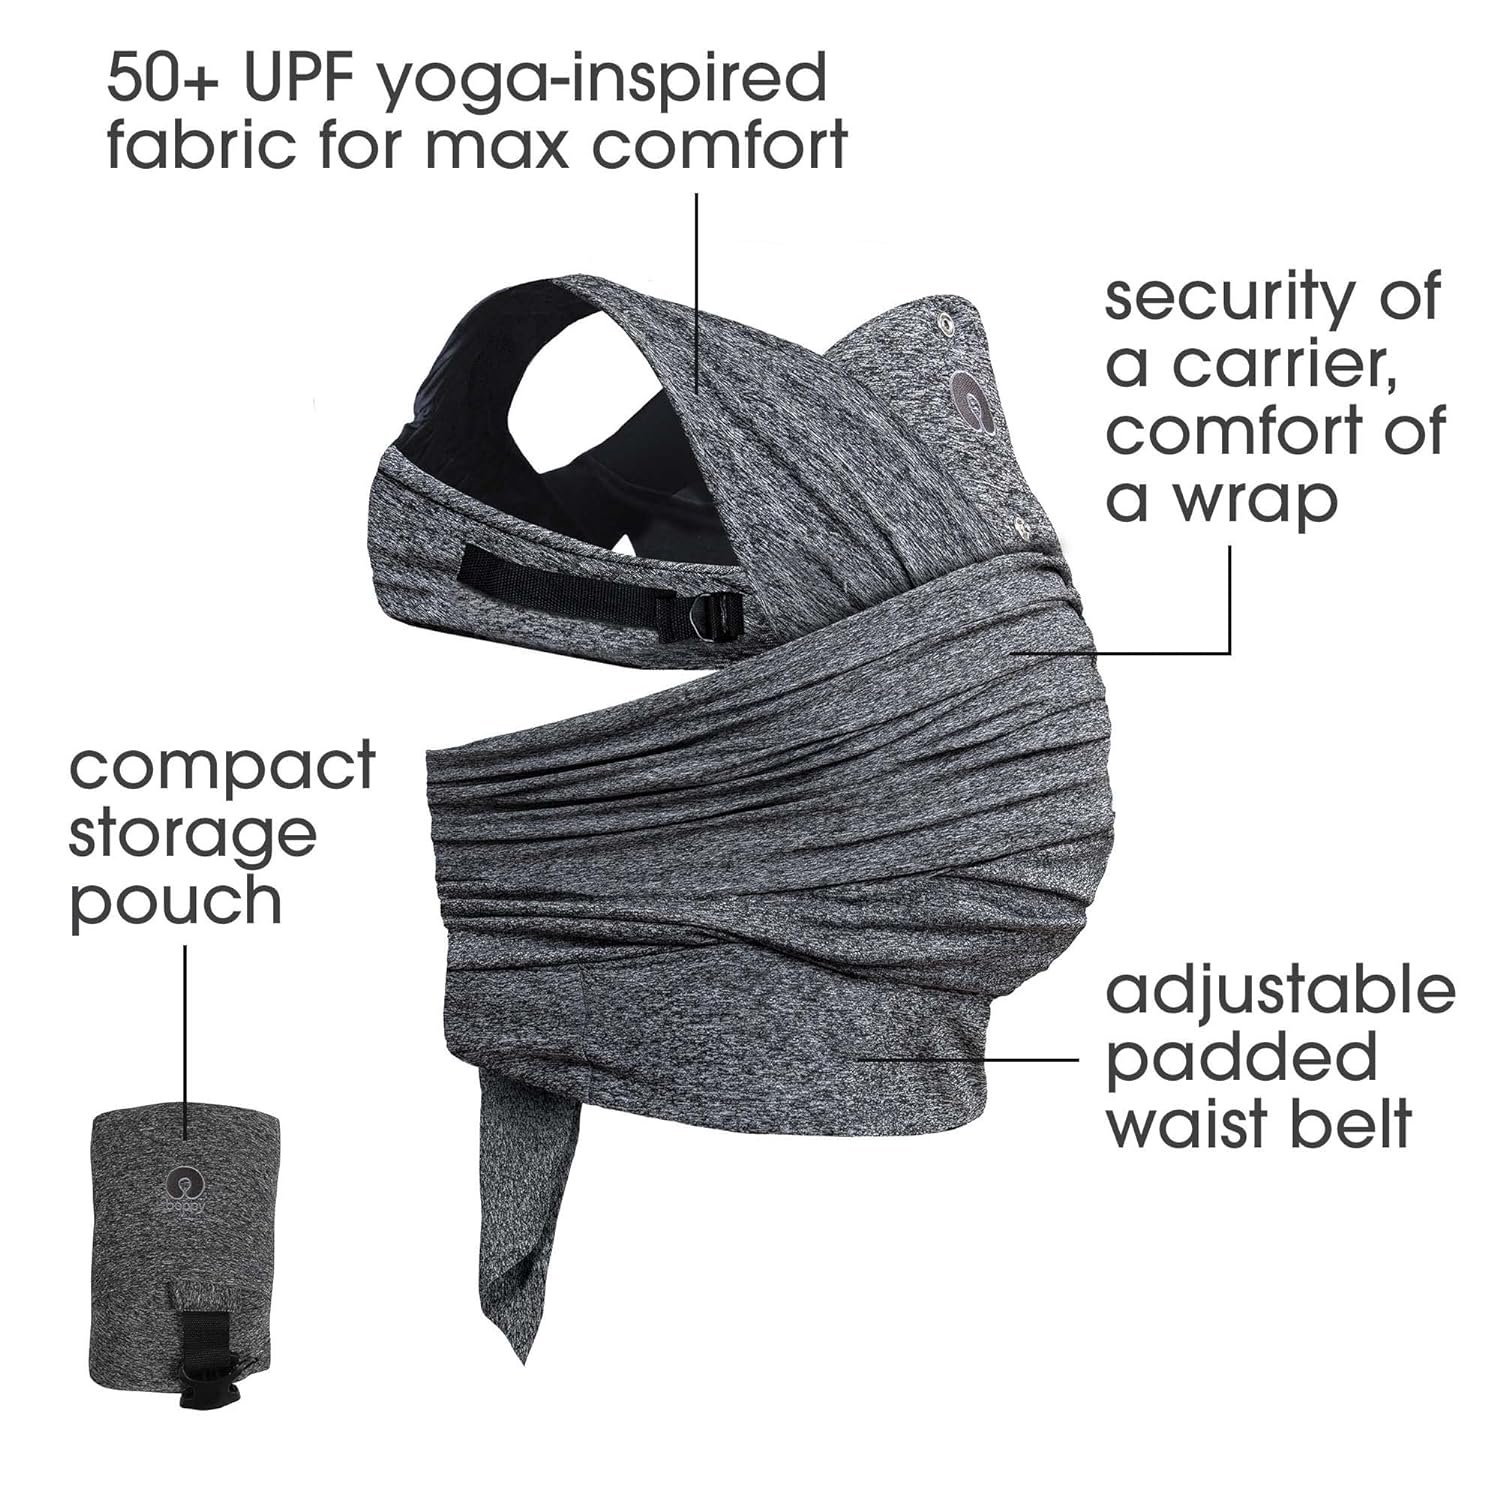 Boppy Baby Carrier- Adjustable ComfyFit, Heathered Gray, Hybrid Wrap with New Arm Straps to Fit More Bodies, 3 Carrying Positions, 0m+ 8-35lbs, Soft Yoga-Inspired Fabric Storage Pouch